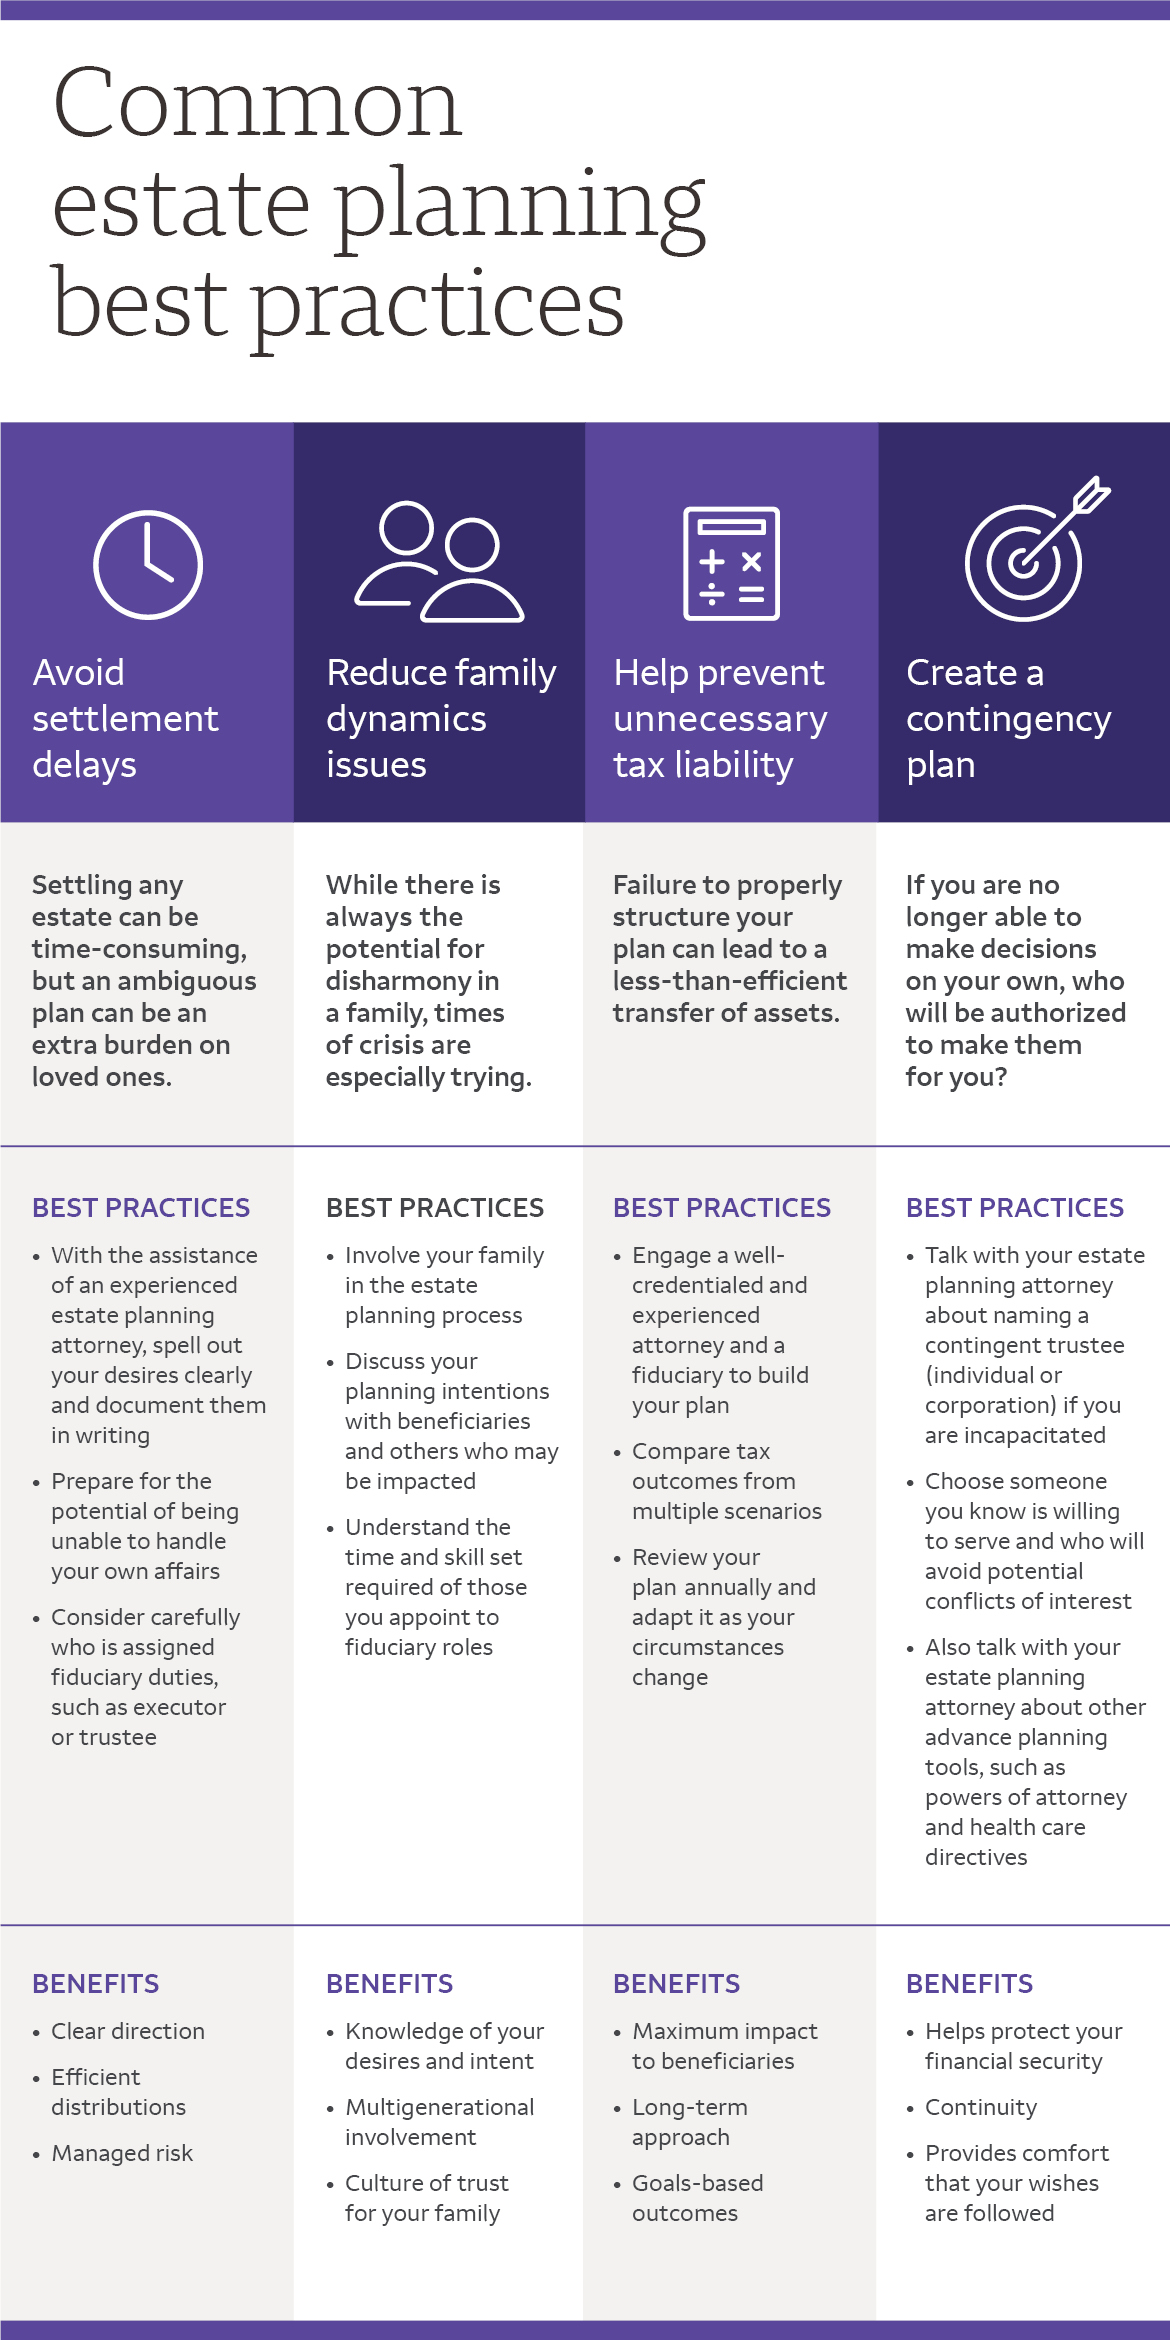 Infographic outlining common estate planning best practices and how to avoid them. For details, click "view transcript."